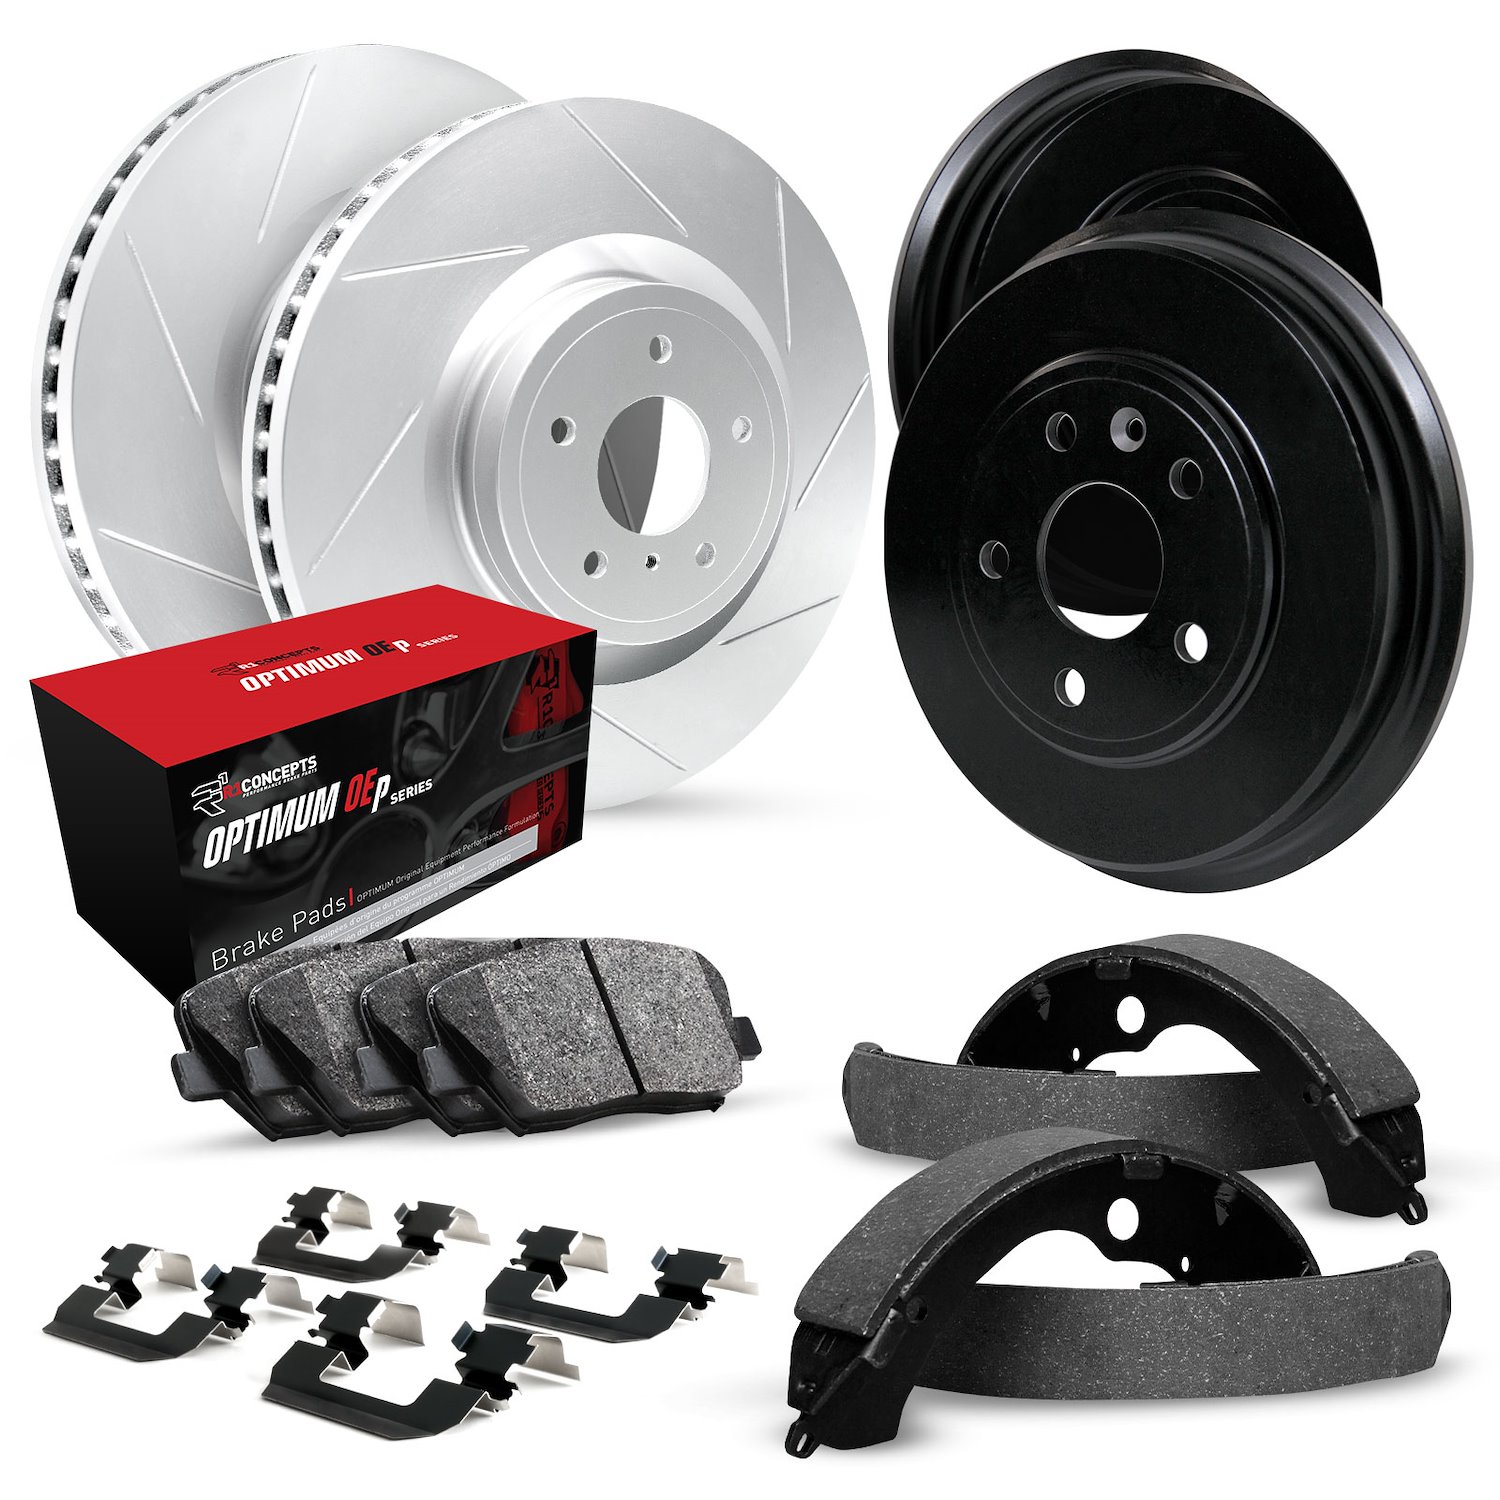 GEO-Carbon Slotted Brake Rotor & Drum Set w/Optimum OE Pads, Shoes, & Hardware, 1987-1988 GM, Position: Front & Rear